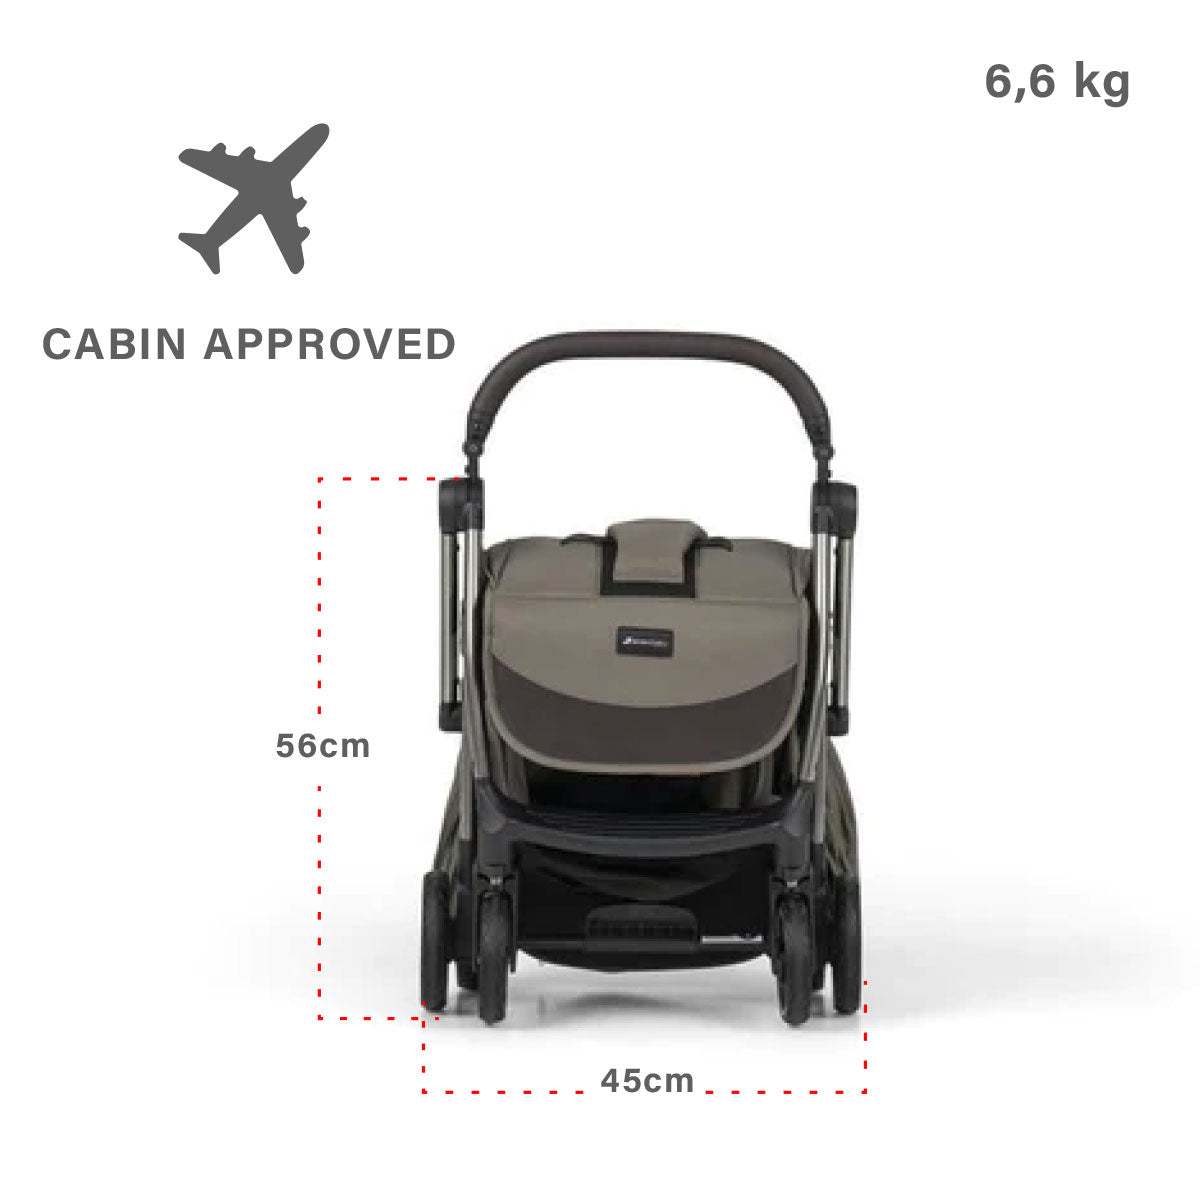 Leclerc baby Influencer Air Stroller - Olive Green